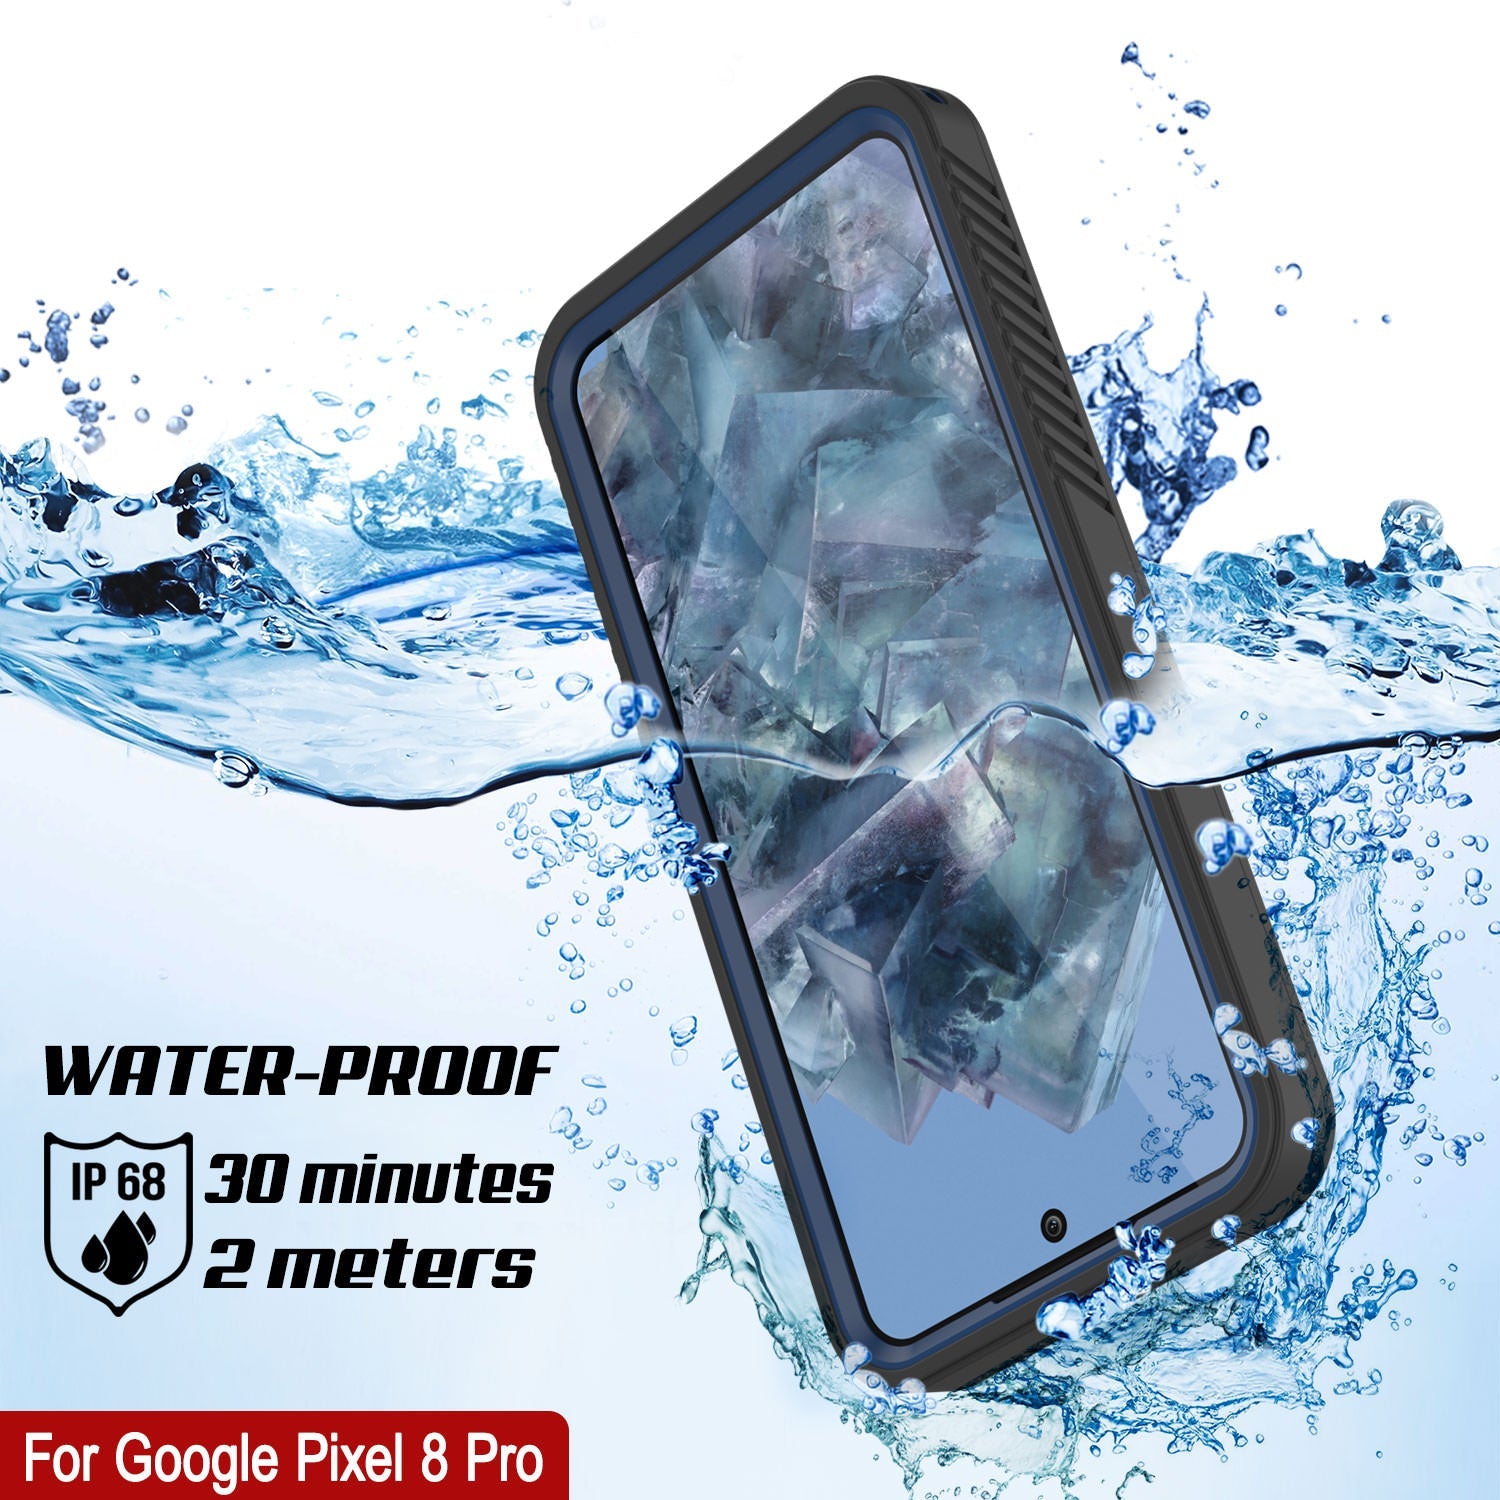 Google Pixel 8 Pro Waterproof Case, Punkcase [Extreme Series] Armor Cover W/ Built In Screen Protector [Navy Blue]